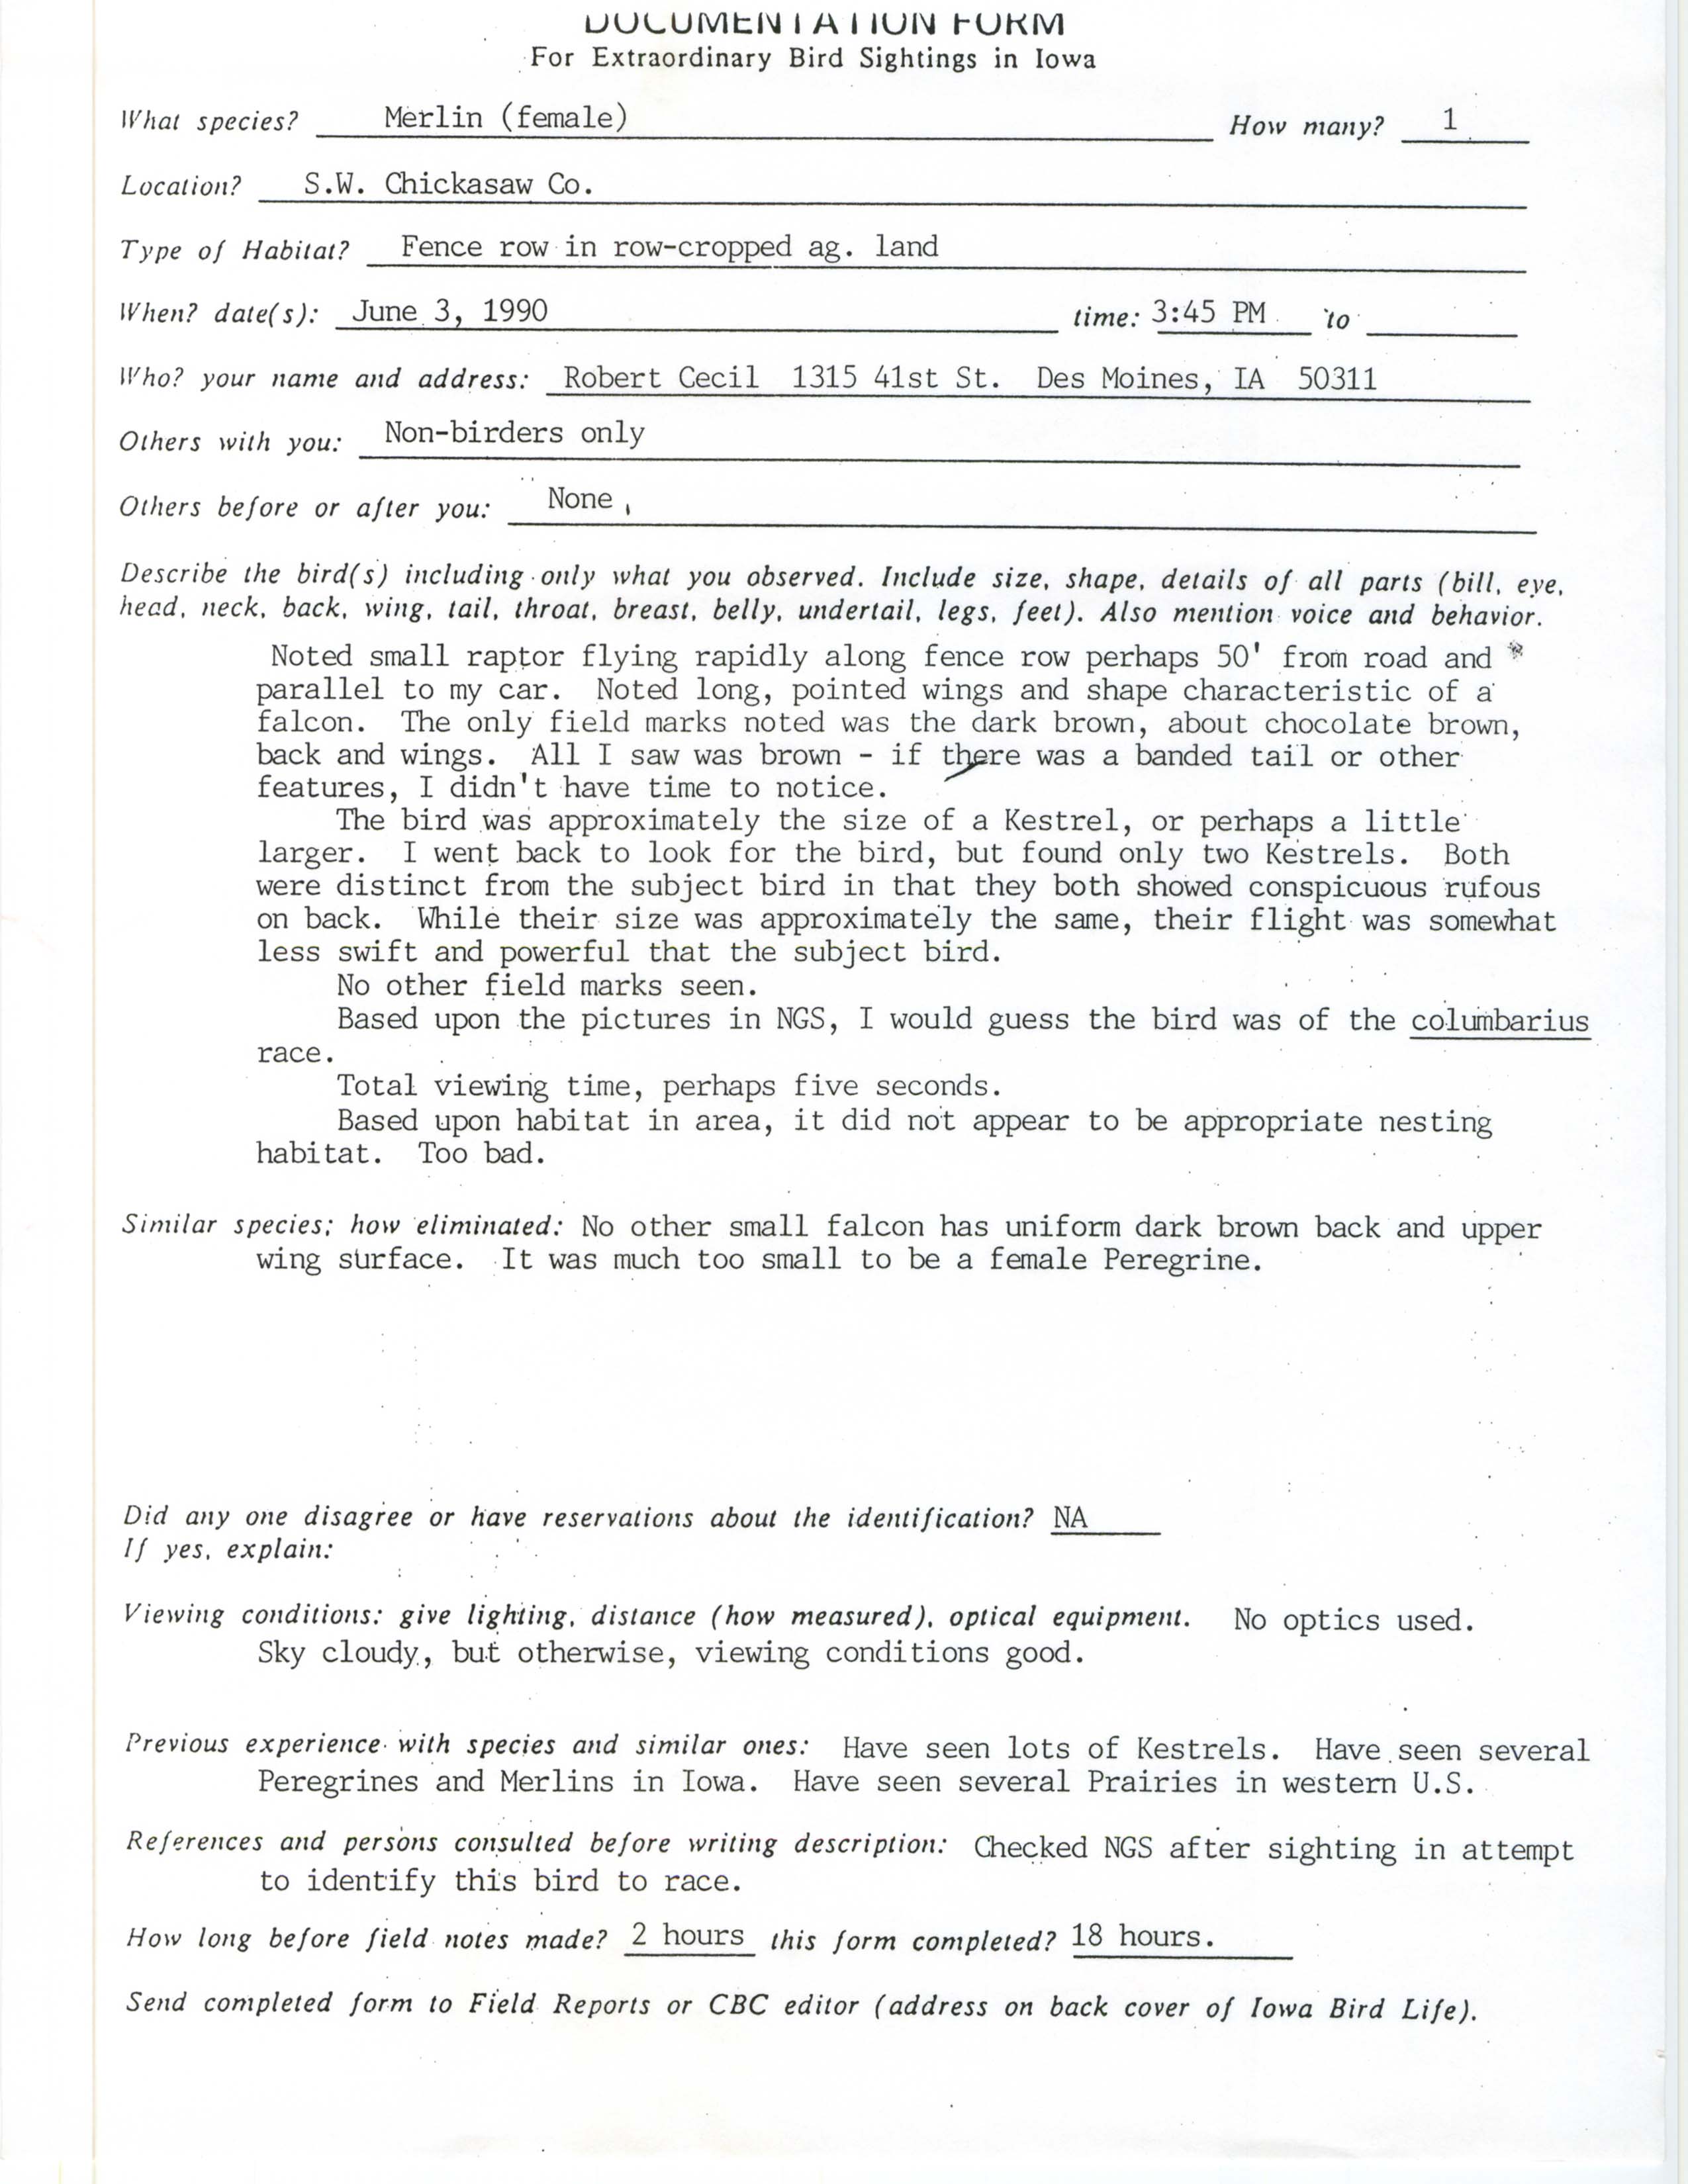 Rare bird documentation form for Merlin at southwest Chickasaw County, 1990